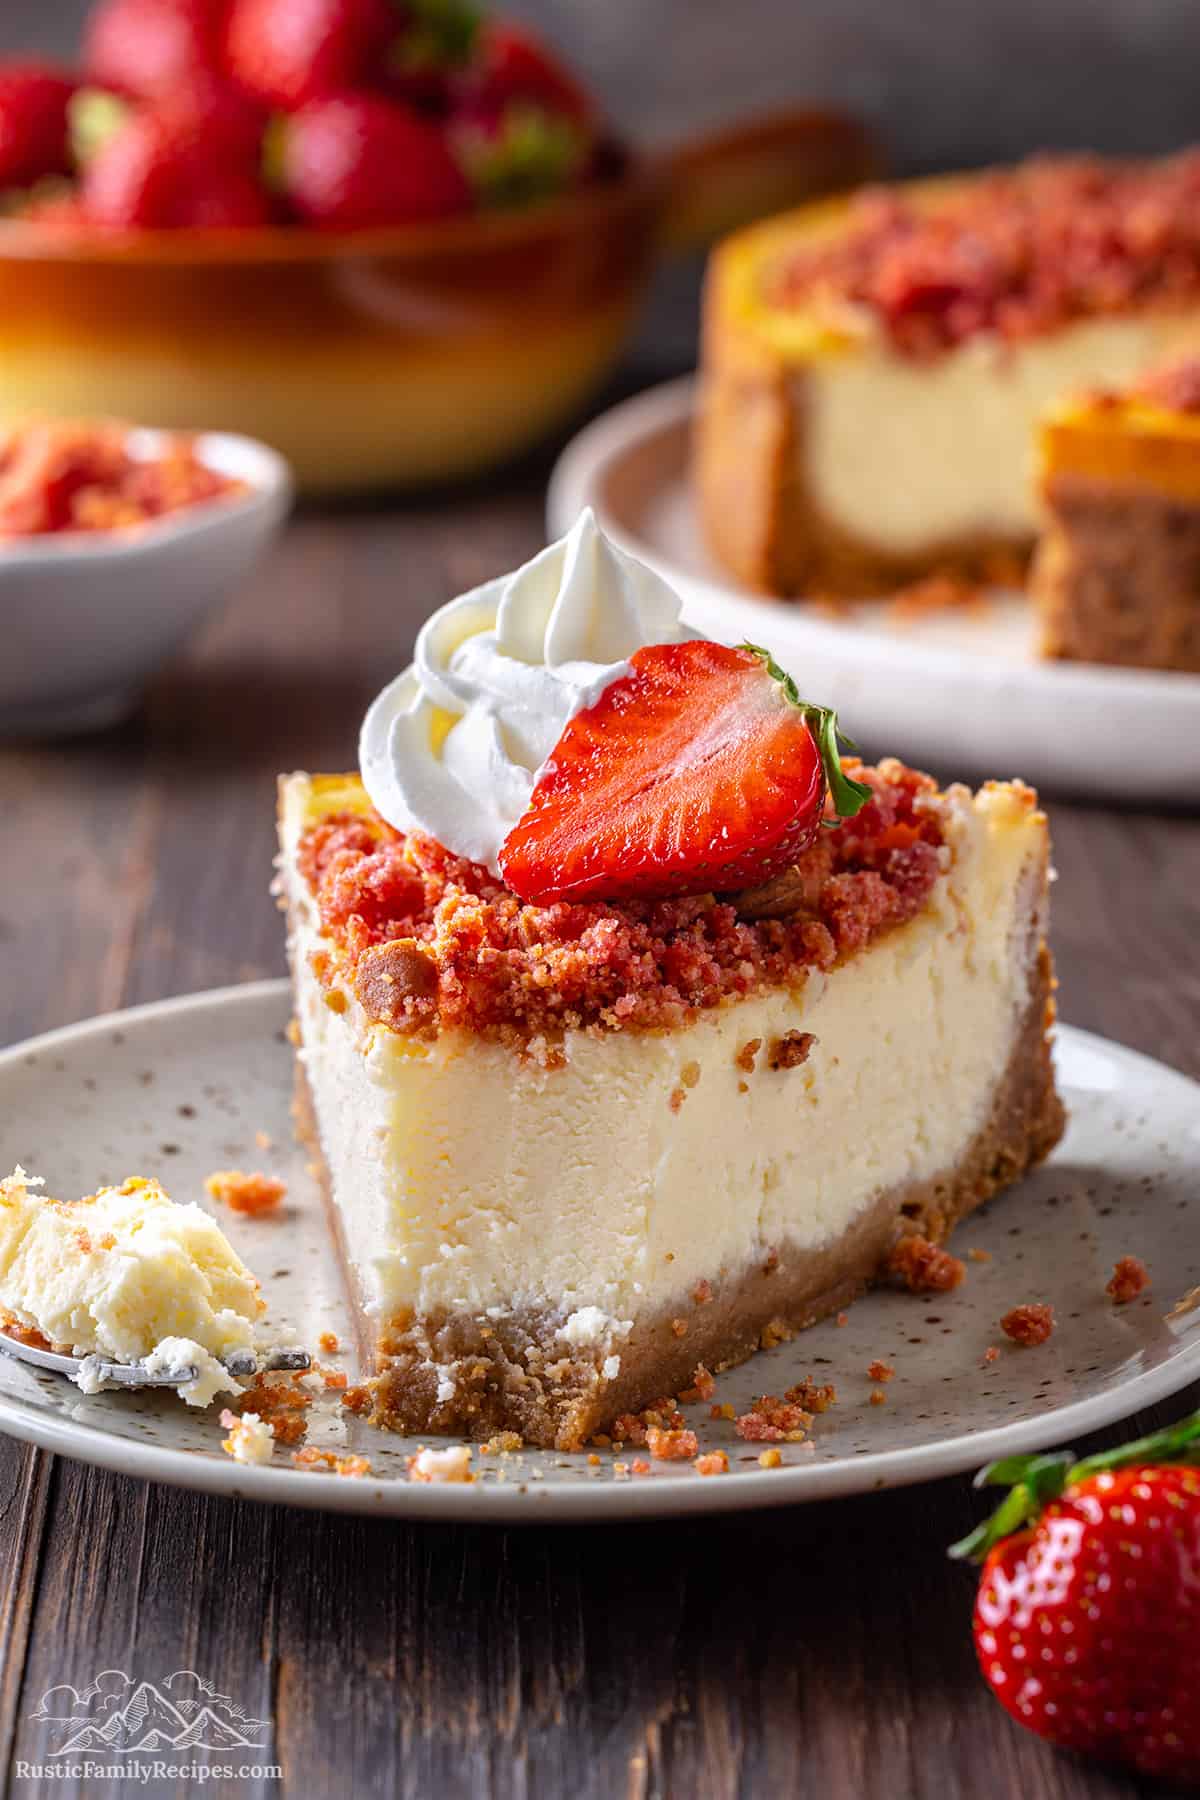 Slice of strawberry crunch cheesecake with a bite taken out